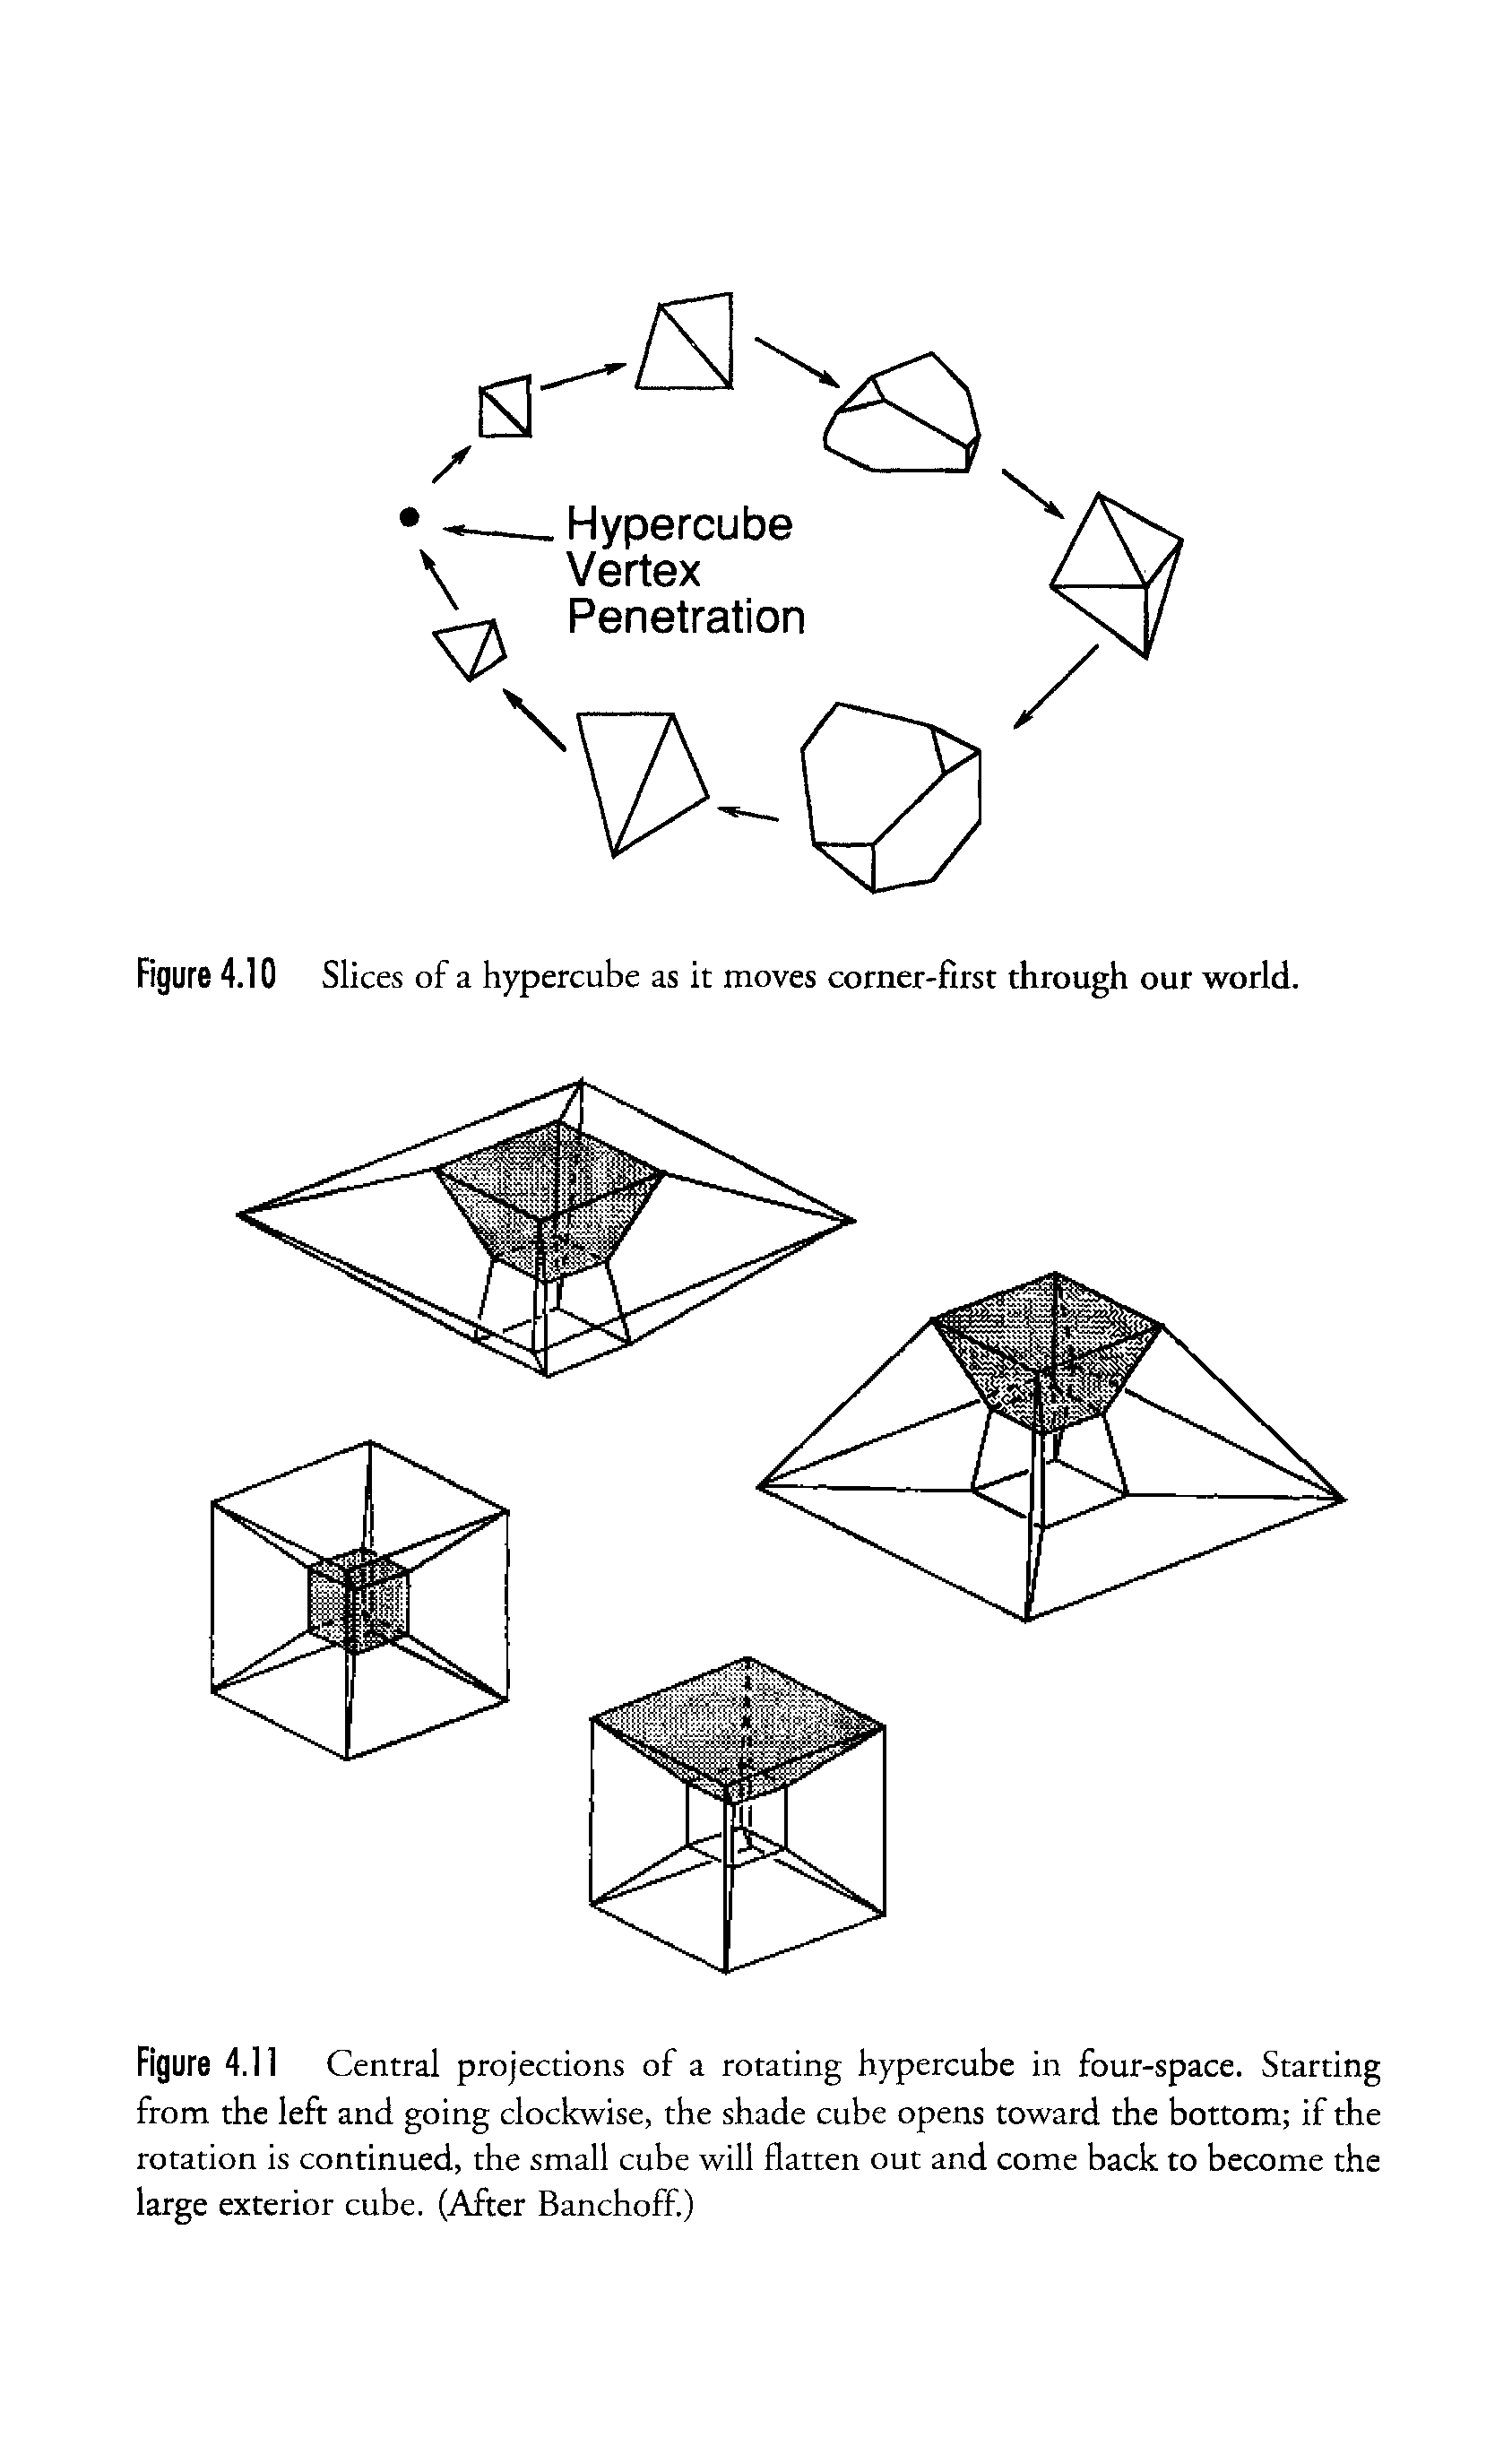 Figure 4.11 Central projections of a rotating hypercube in four-space. Starting from the left and going clockwise, the shade cube opens toward the bottom if the rotation is continued, the small cube will flatten out and come back to become the large exterior cube. (After Banchoff)...